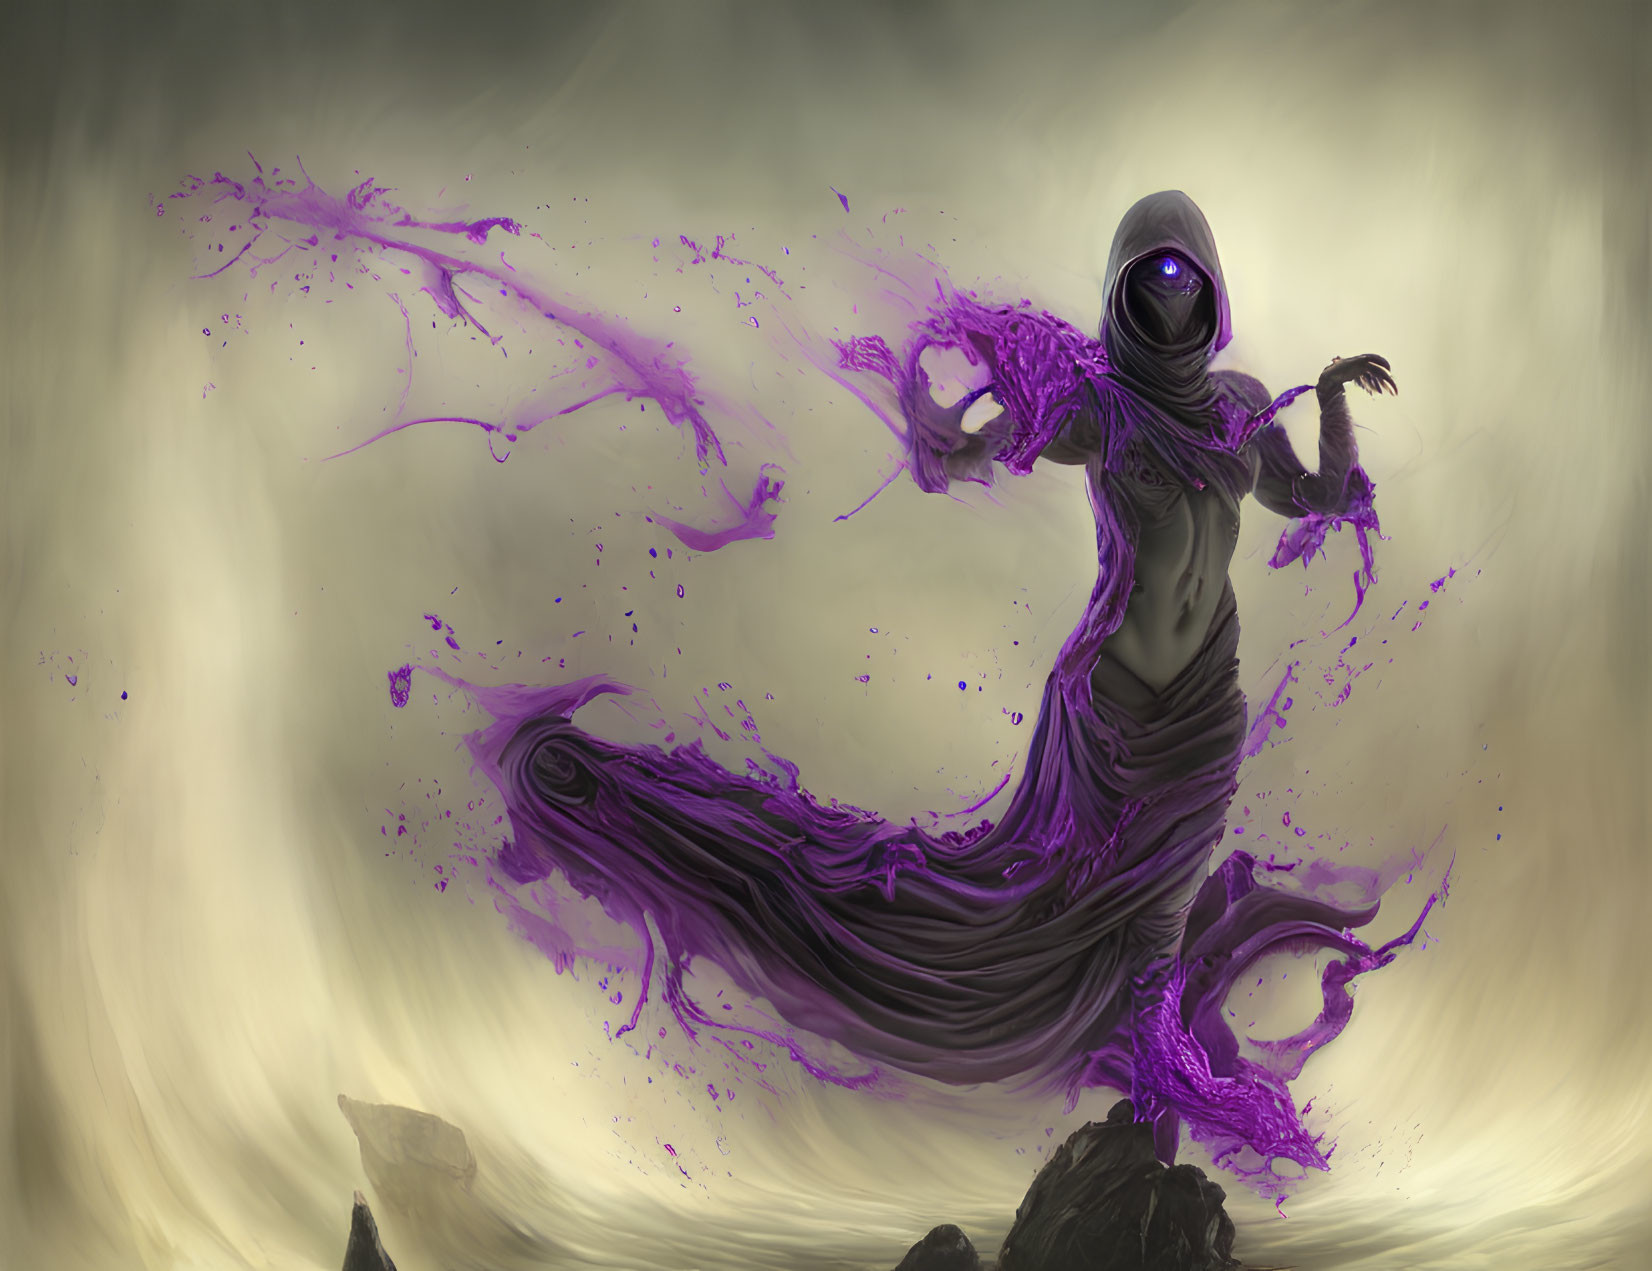 Hooded figure with swirling purple energy in dramatic setting